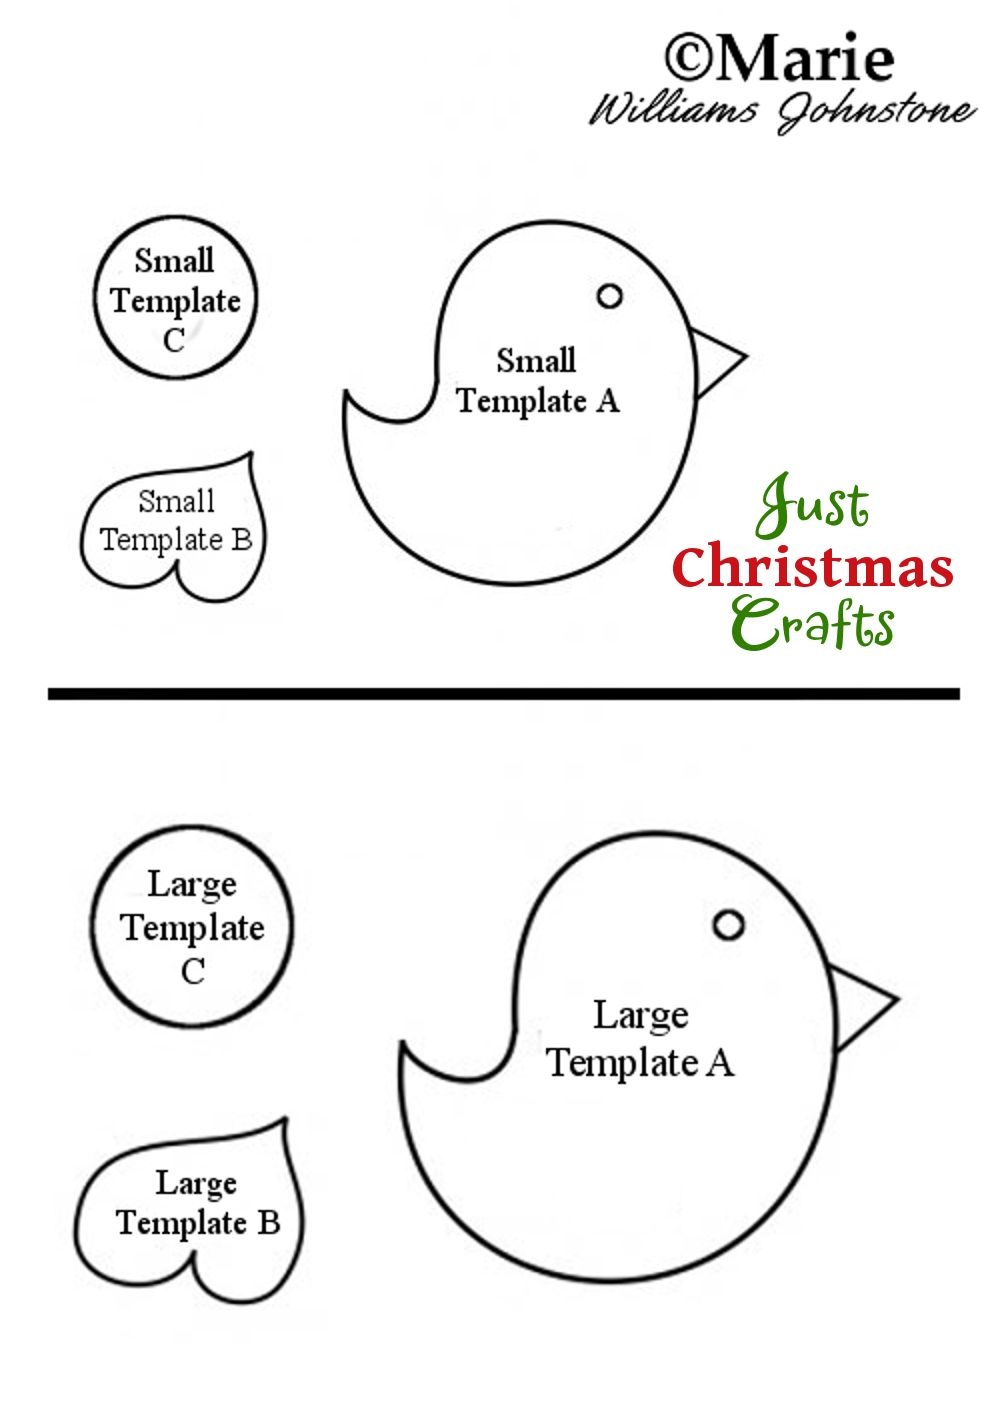 Free Printable Robin Bird Template For Crafts | Christmas - Crafts - Free Printable Felt Patterns